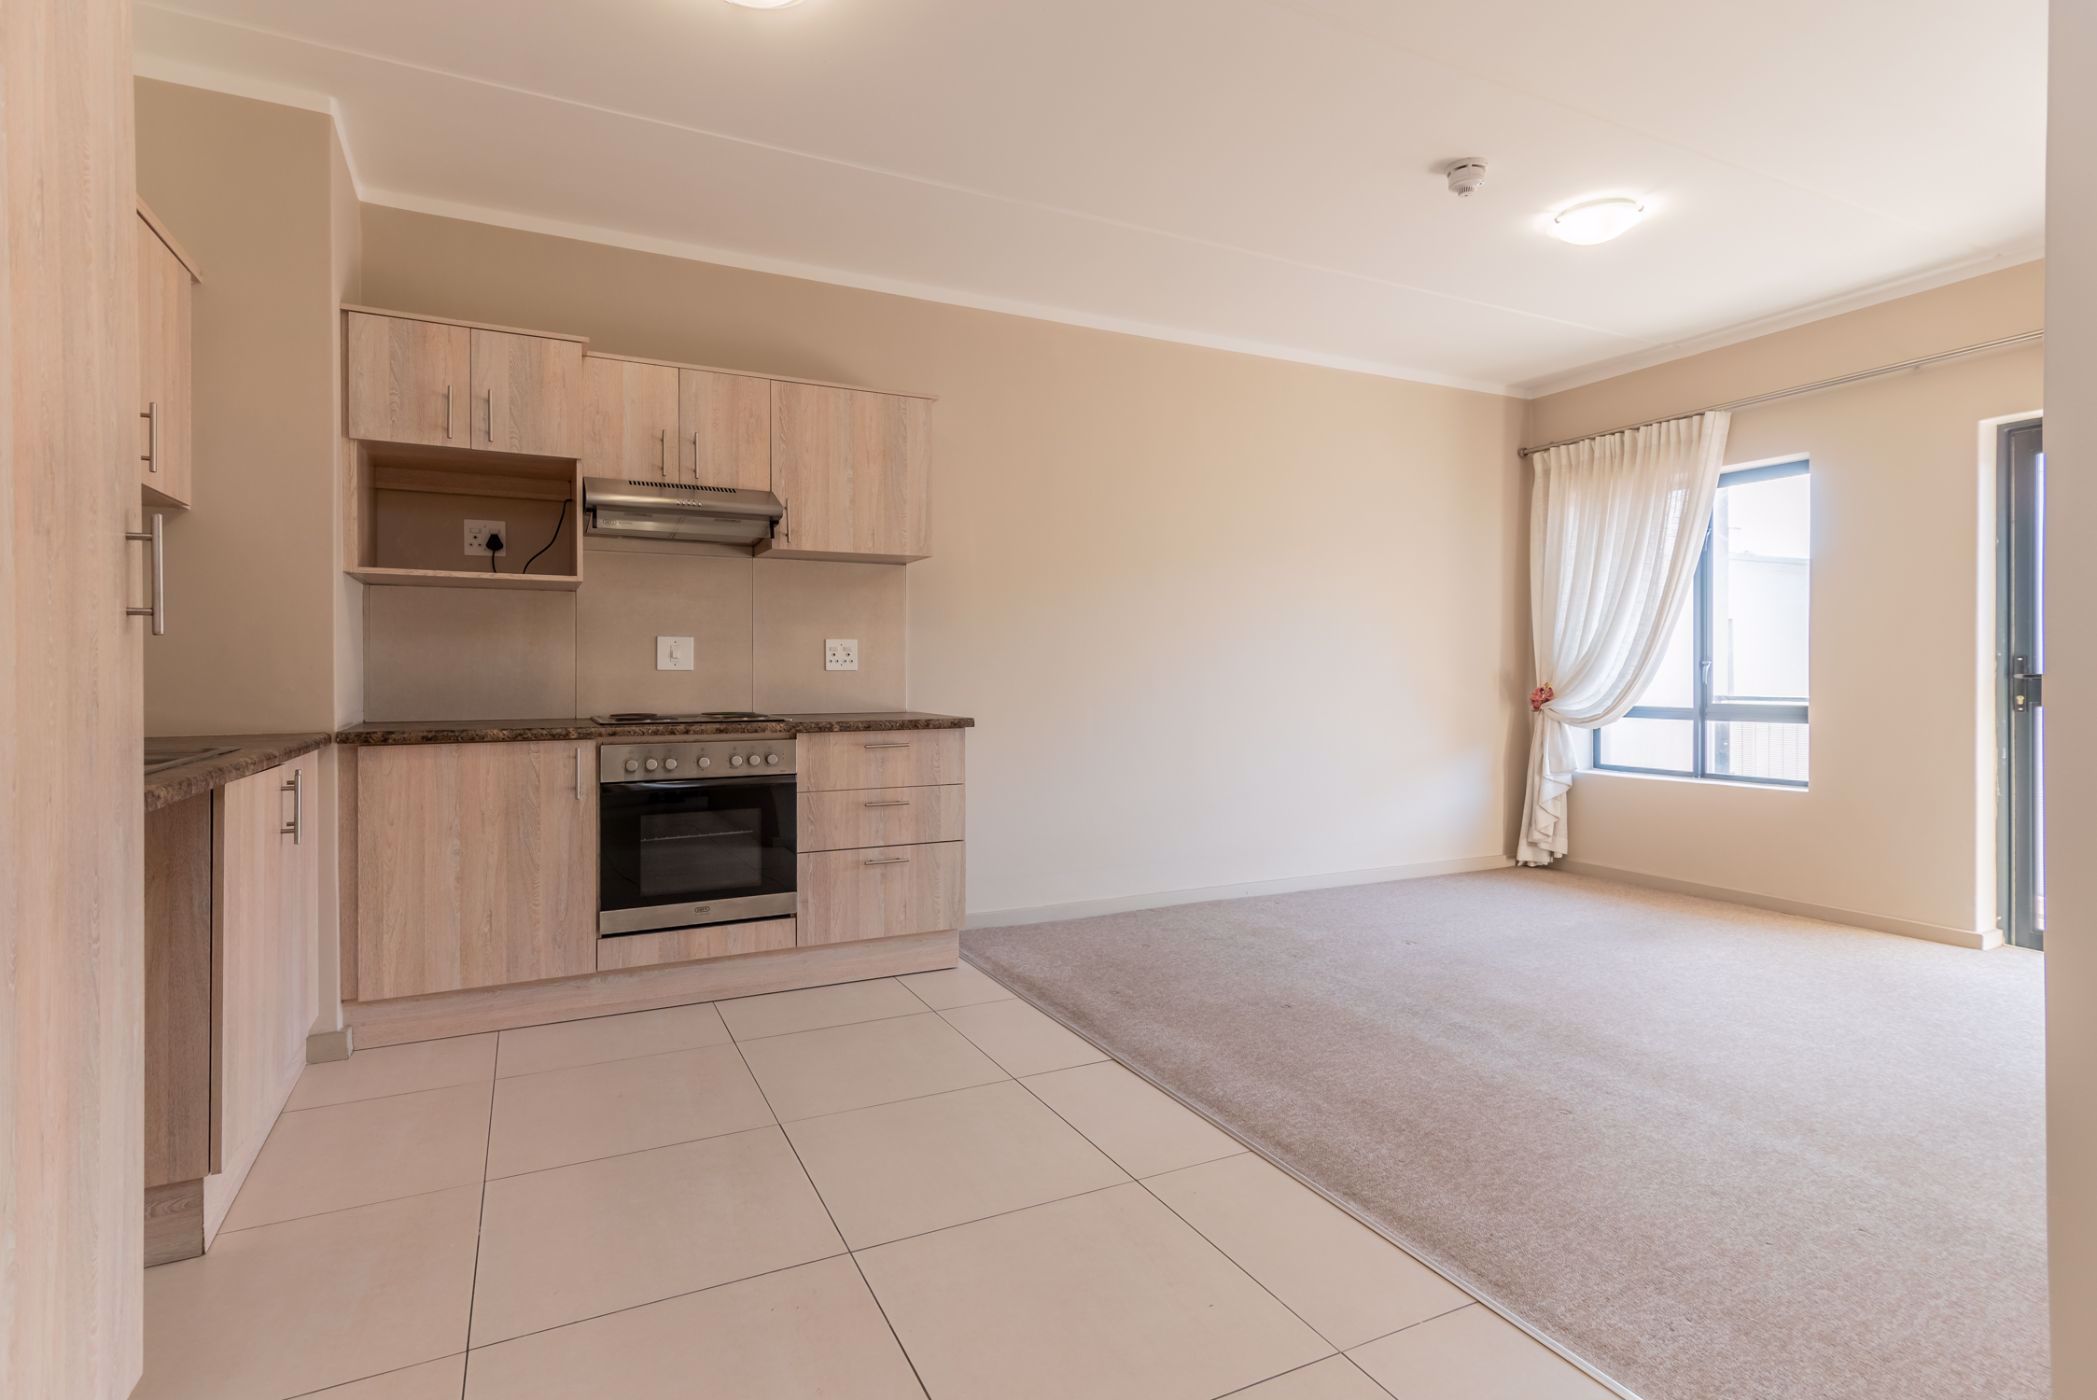 2 bedroom apartment for sale in Pinelands (Cape Town)